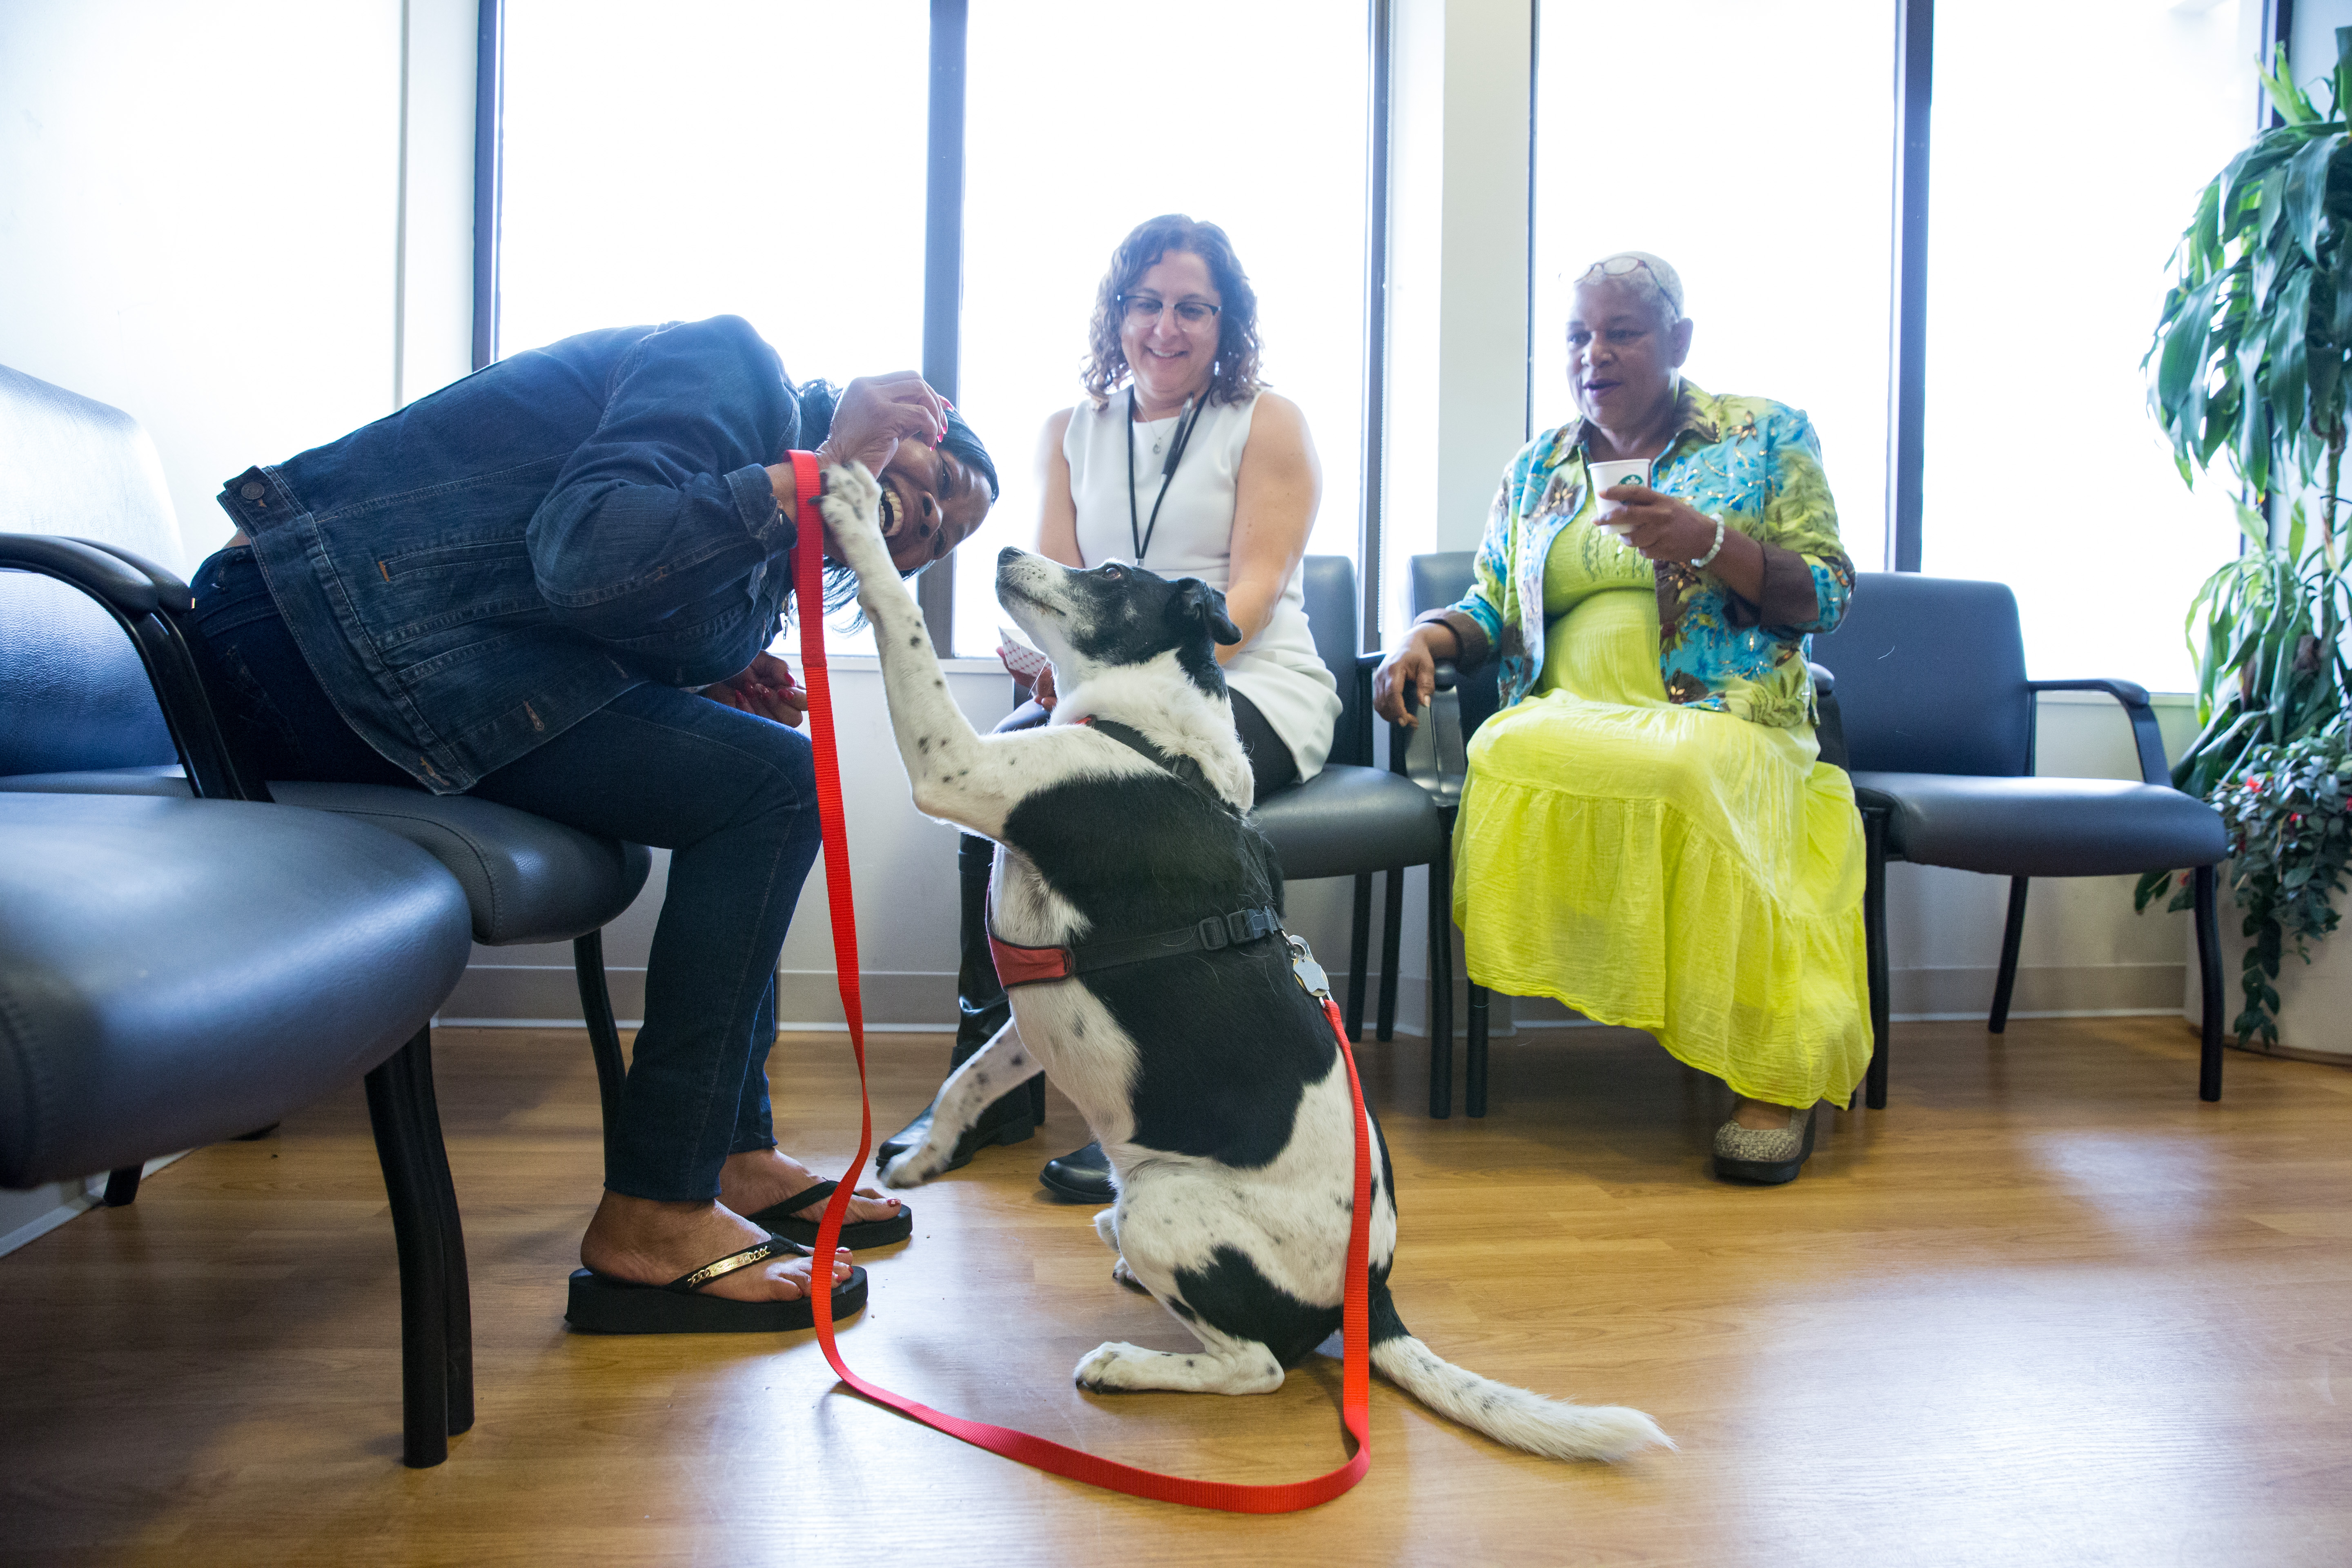 IMPORTED: www_commonwealthfund_org____media_images_newsletters_transforming_care_2016_june_ucsf_20160622_therapy_dog_selects_004_w_100_25.jpg